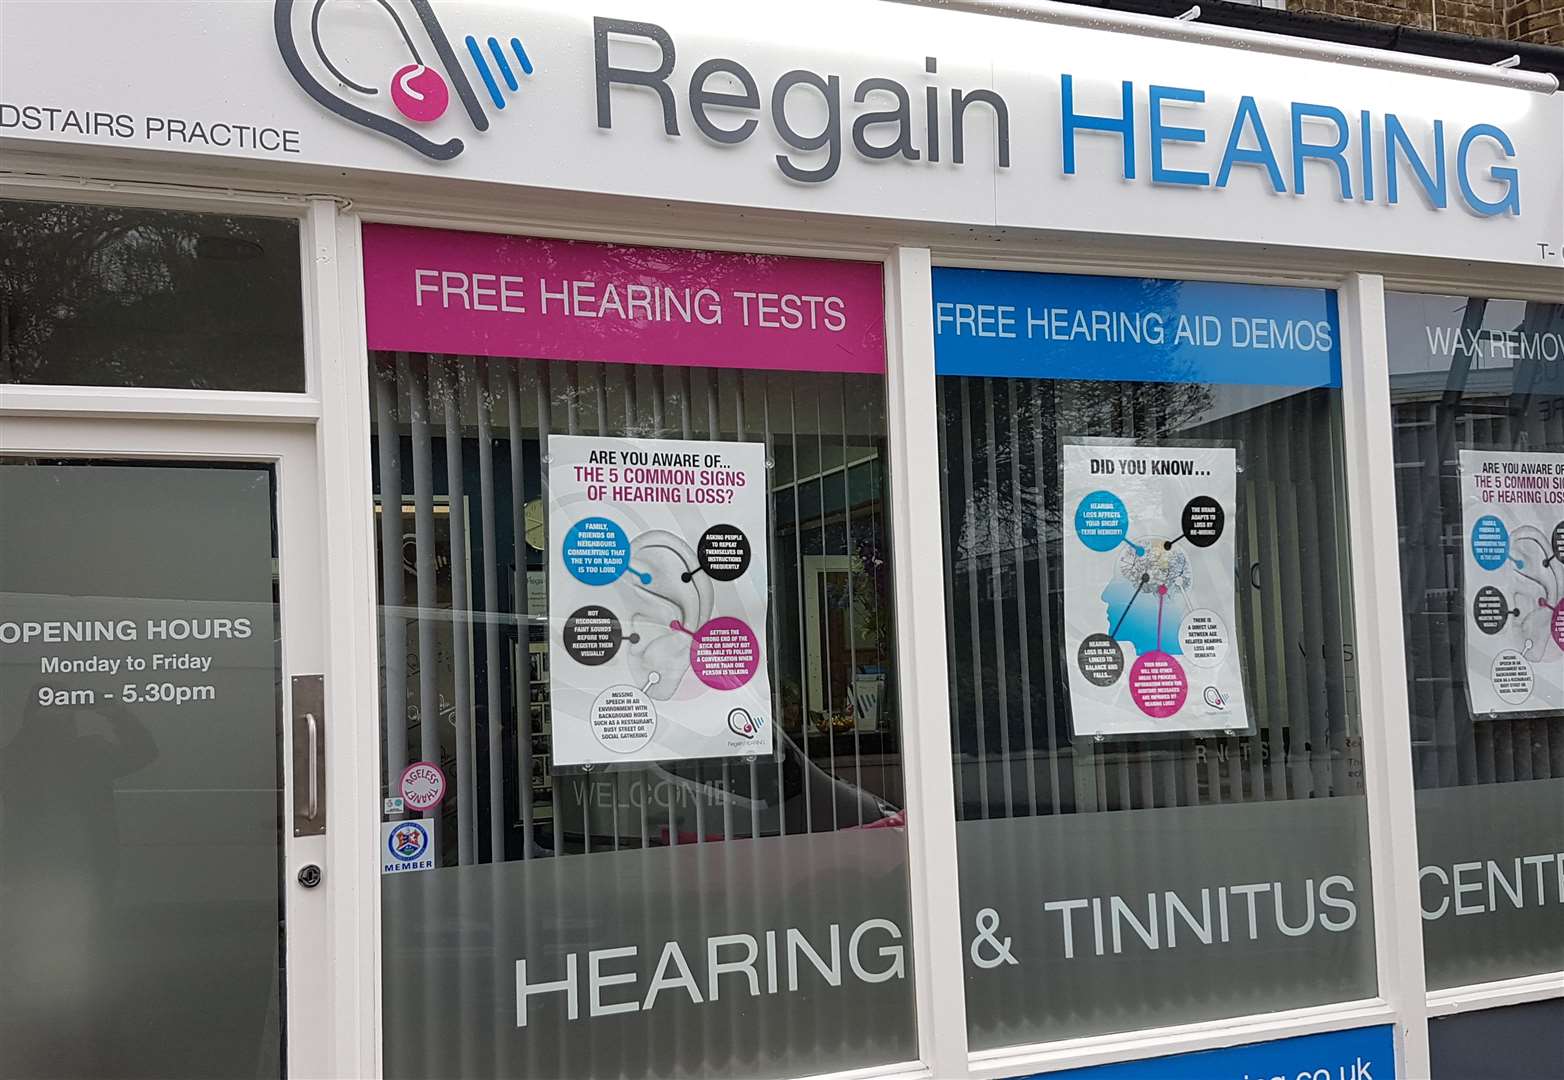 A fully independent family run practice, Regain Hearing is run by highly qualified and experienced, specialist consultant audiologists.